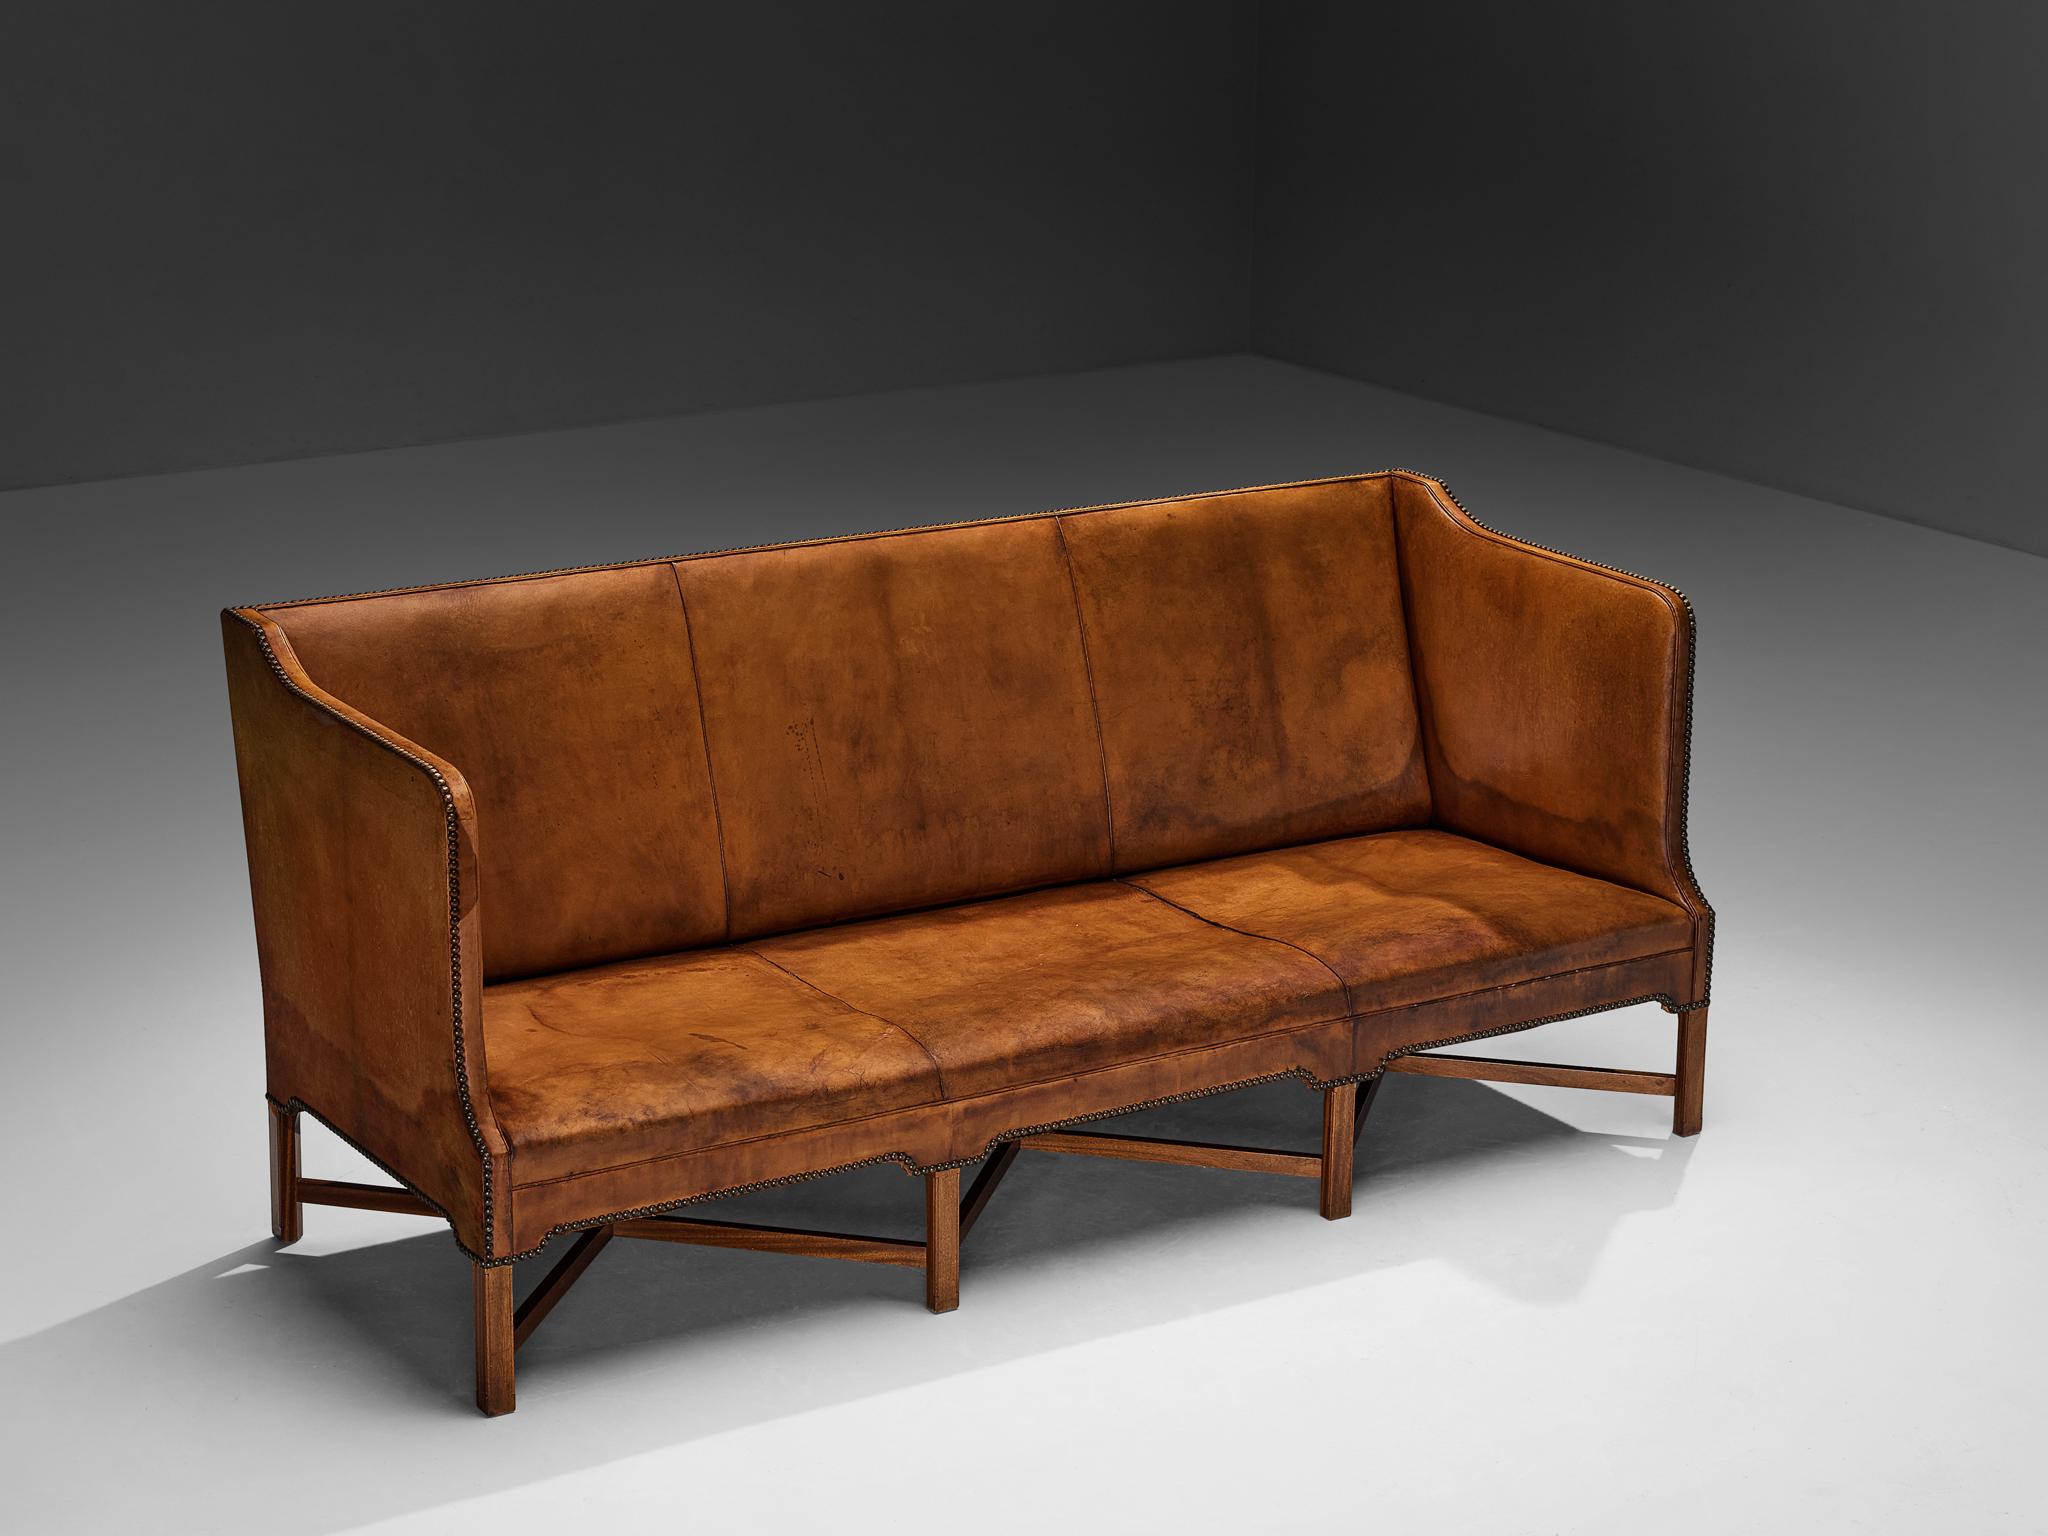 Kaare Klint for Rud. Rasmussen, sofa, model ‘4118’, Niger leather, mahogany, brass, Denmark, design 1930, production mid-1960s 

Kaare Klint originally designed the present three-seat sofa, known as 4118, for the office of the Prime Minister